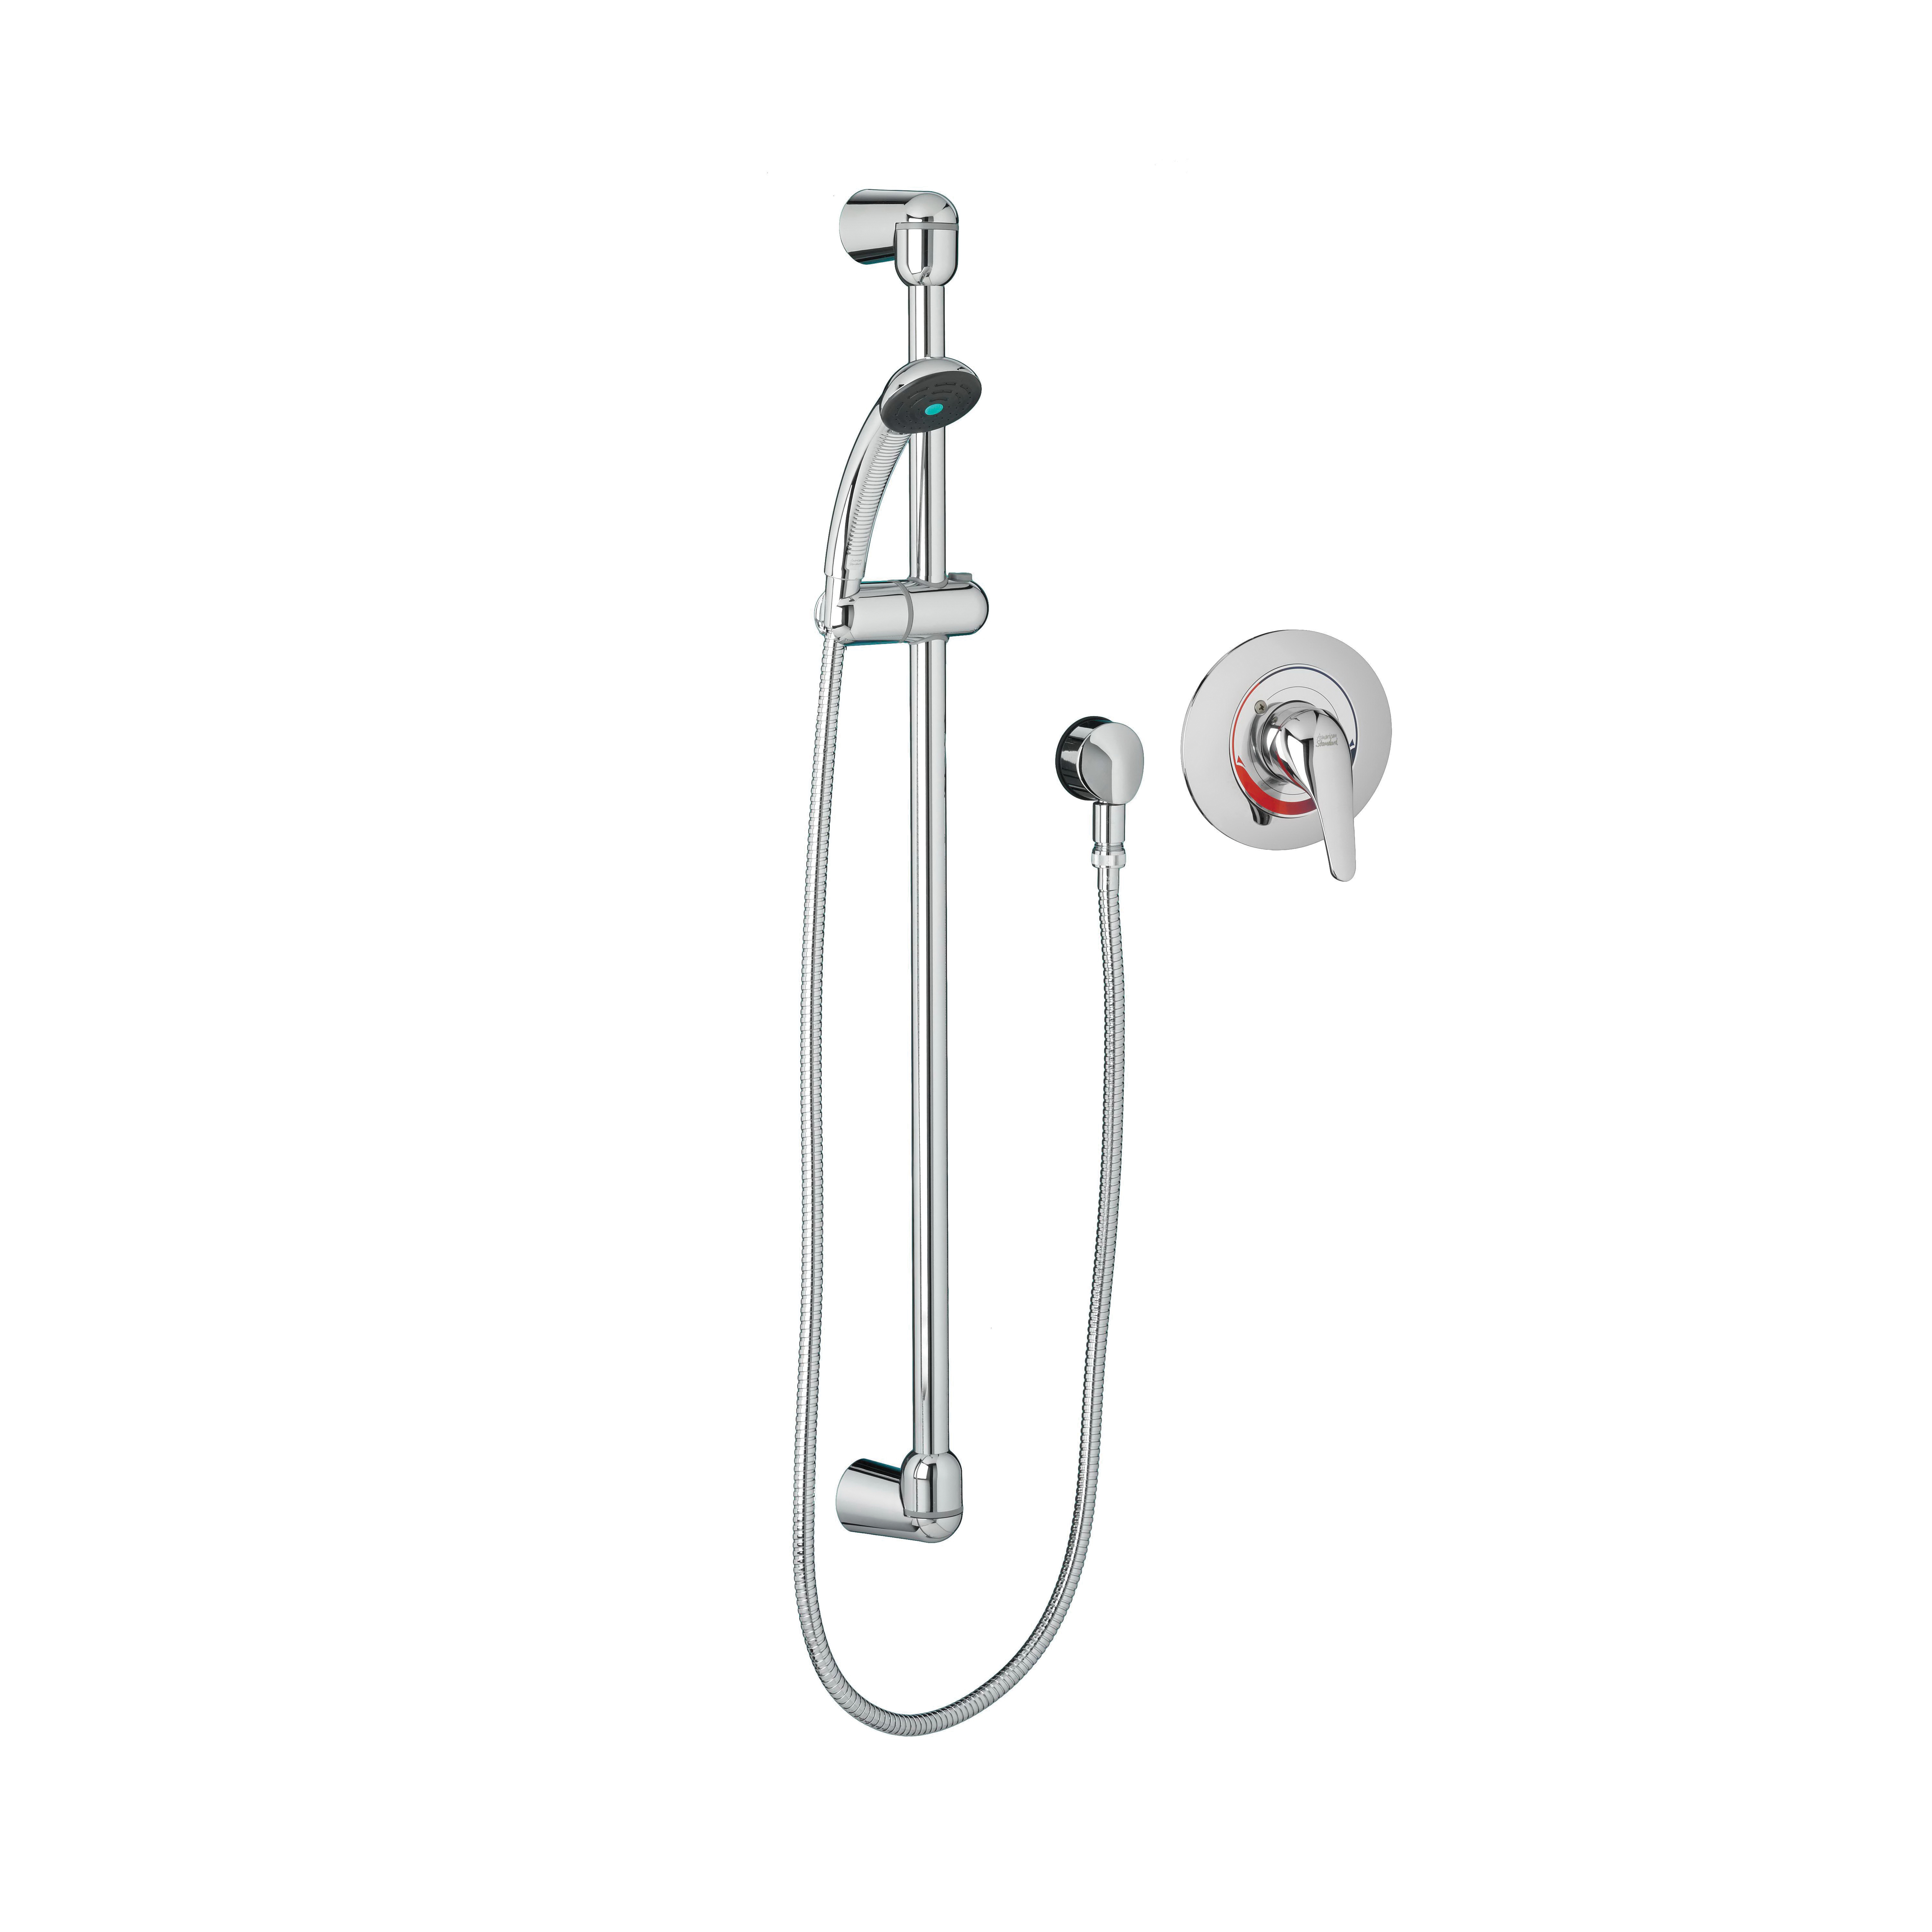 American Standard 1662221.002 FloWise® Shower System Kit, 2.5 gpm Flow Rate, Polished Chrome, Import